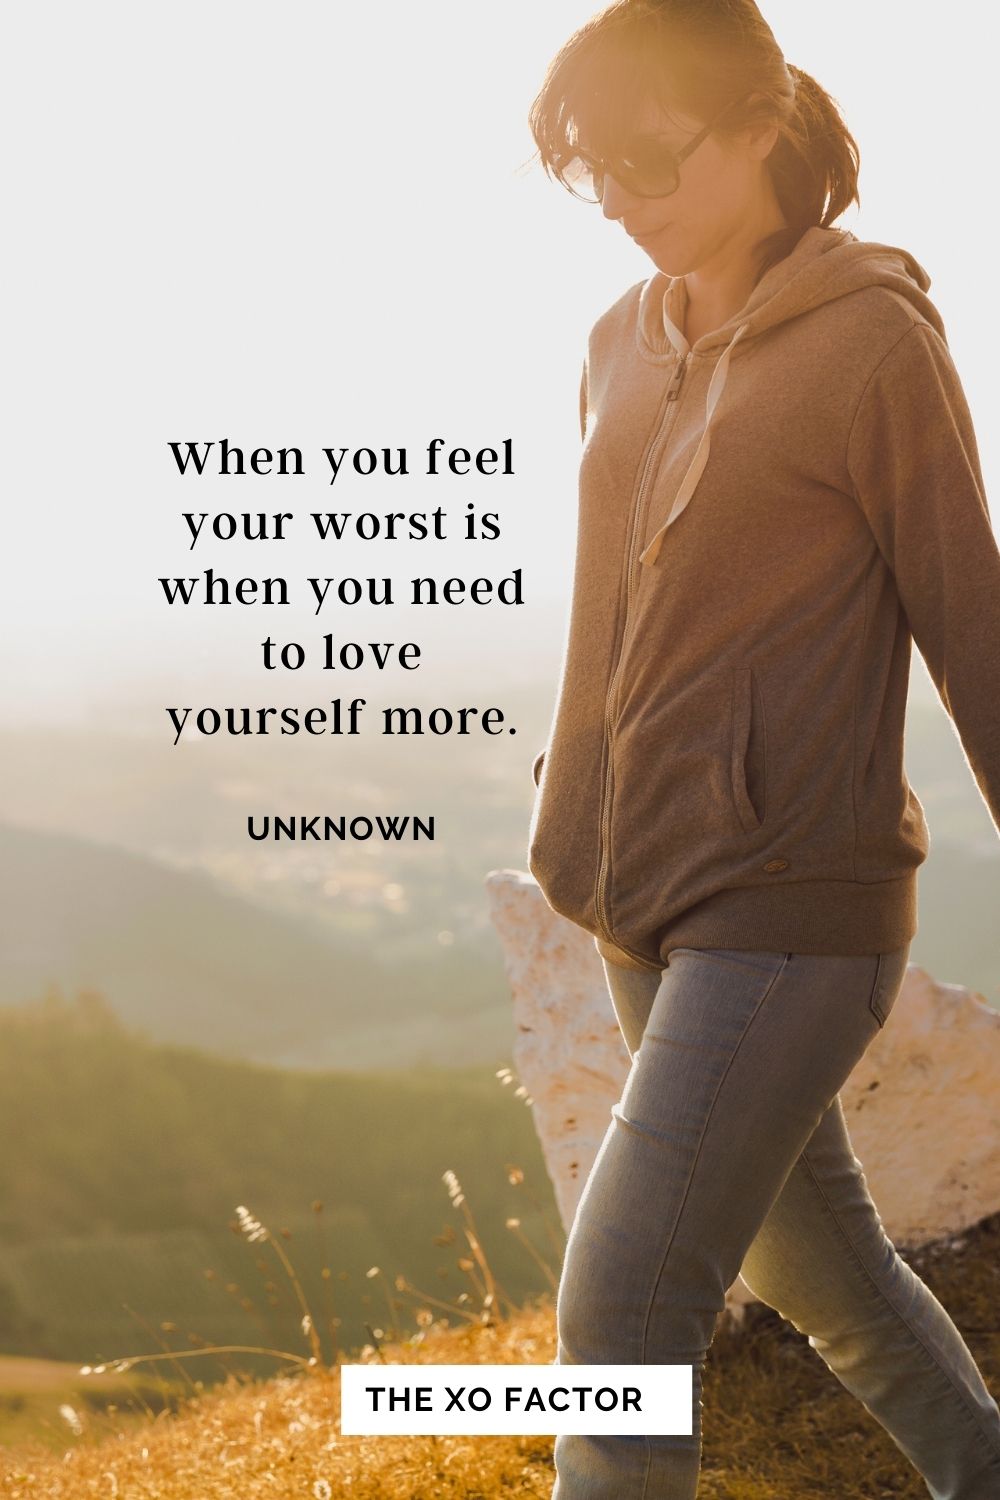 When you feel your worst is when you need to love yourself more. Unknown